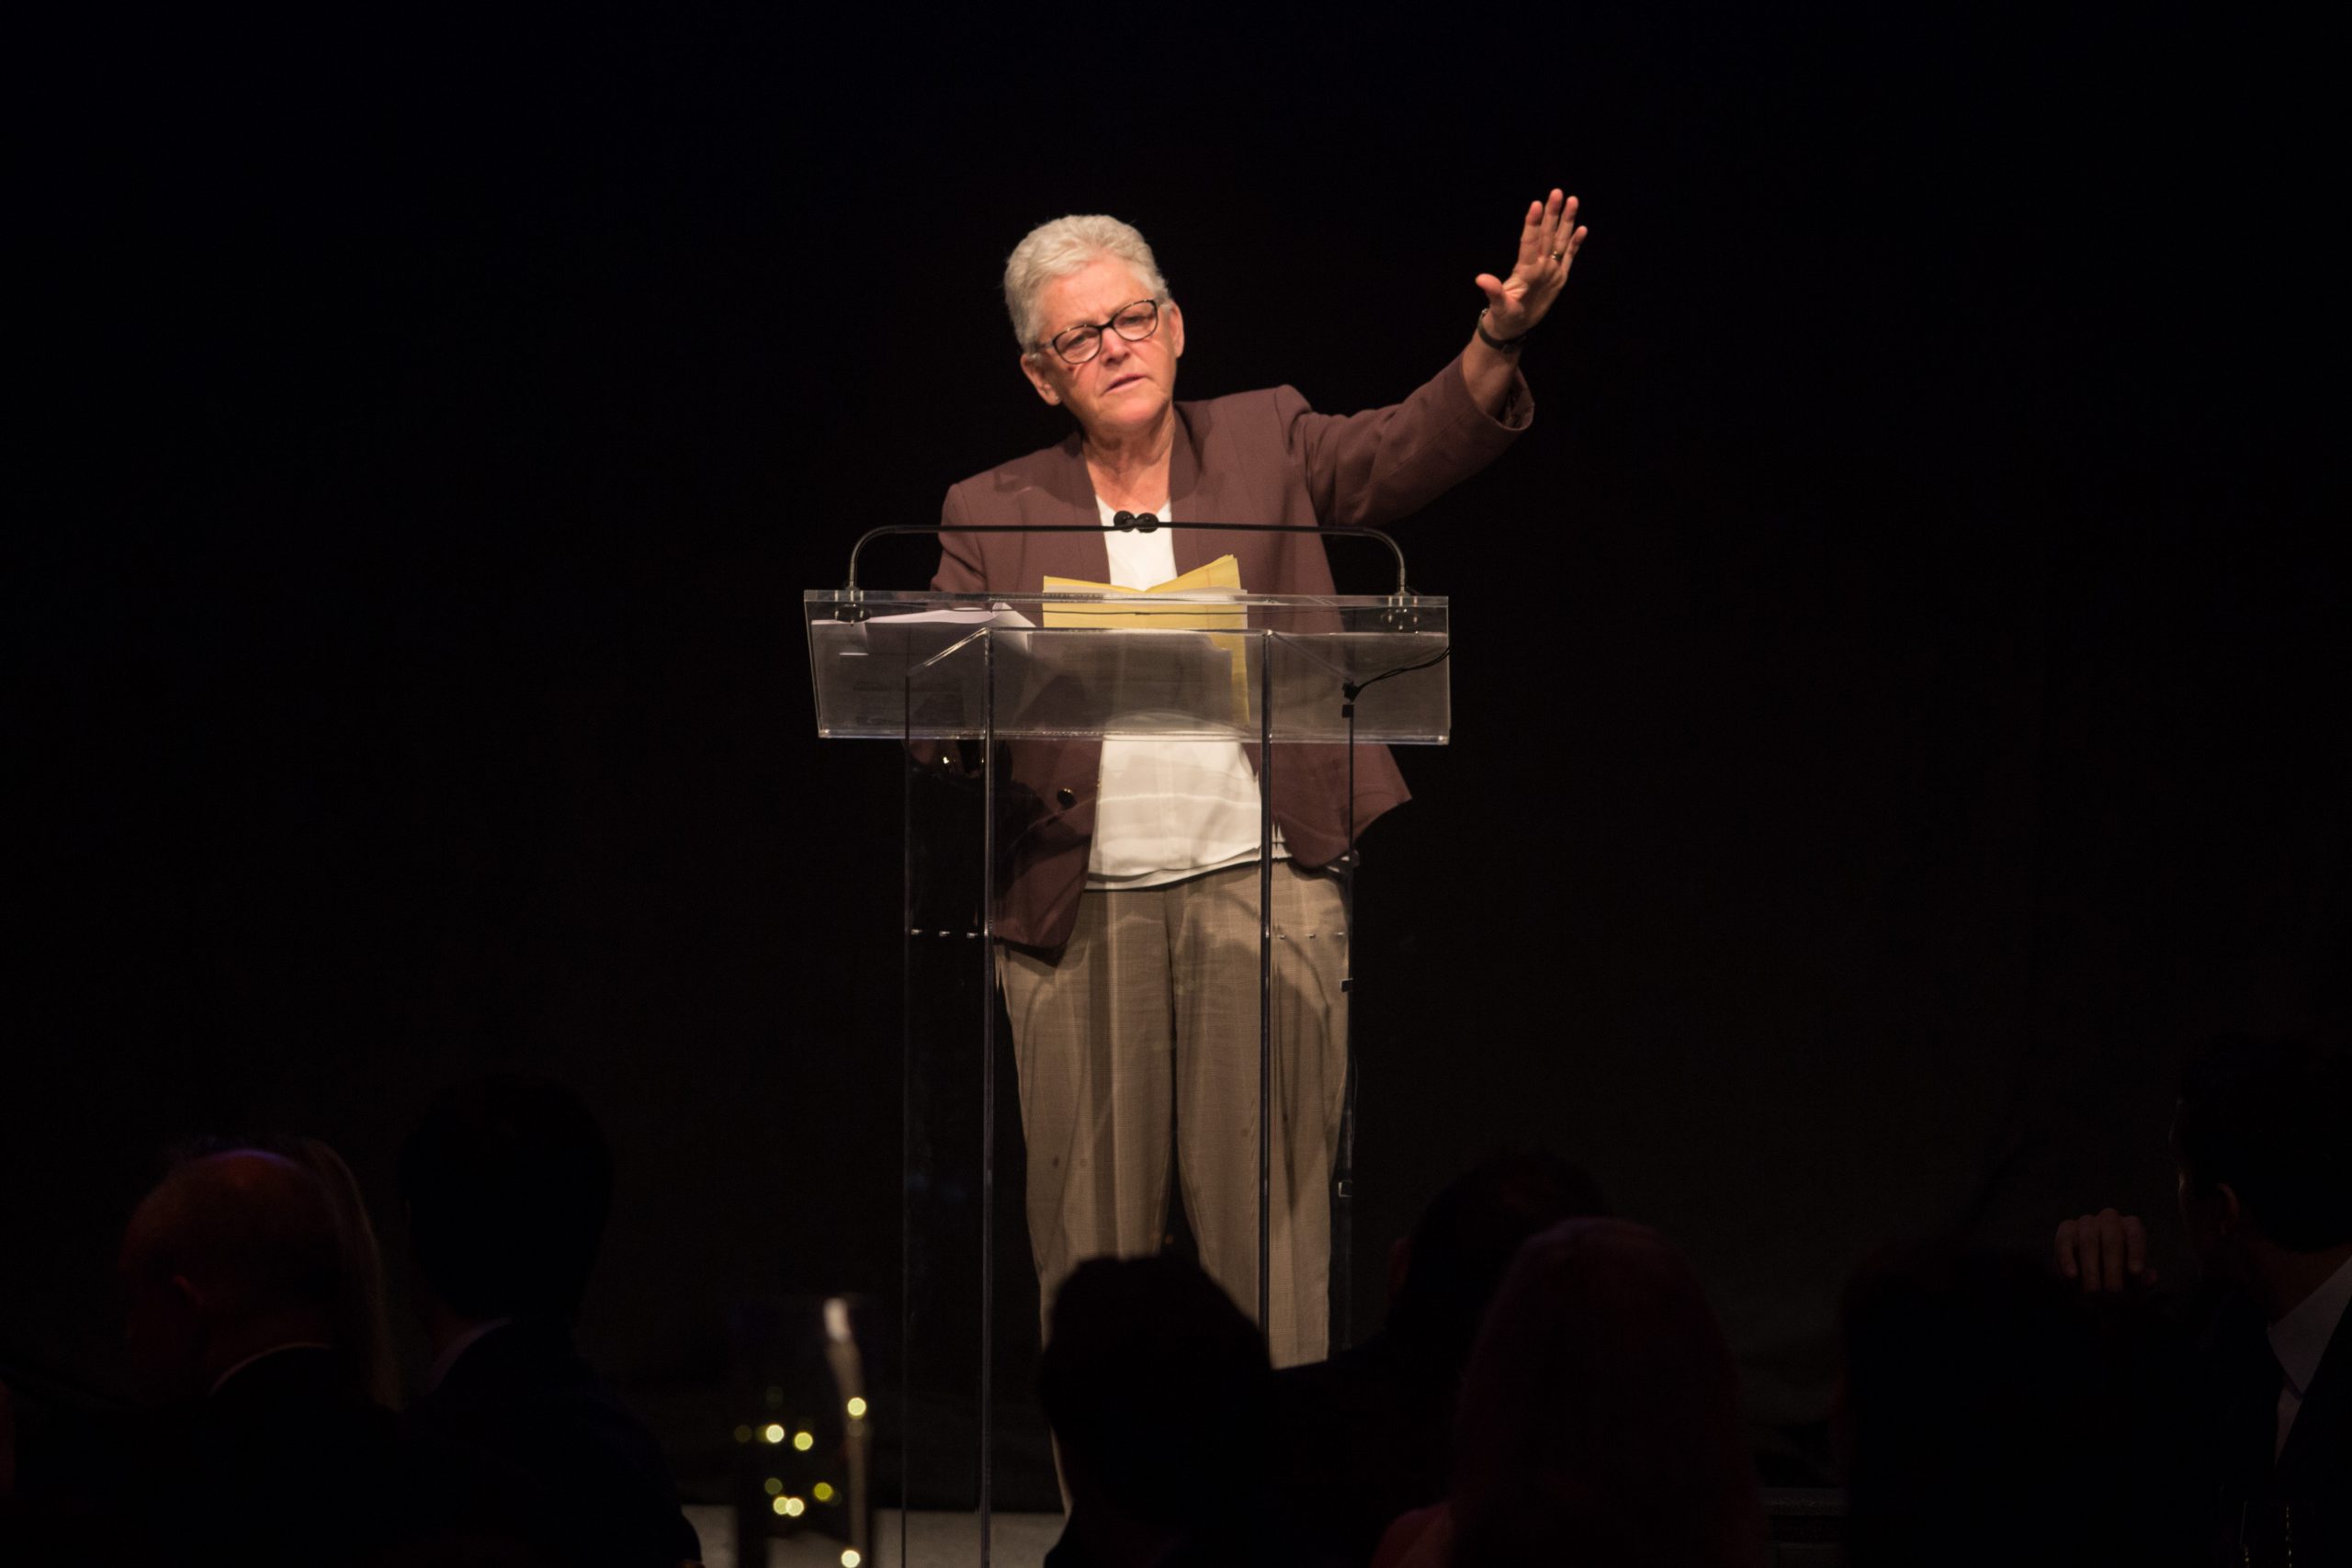 Former US EPA Administrator Gina McCarthy Rouses <br> Crowd To Its Feet With Passionate Pollution Plea